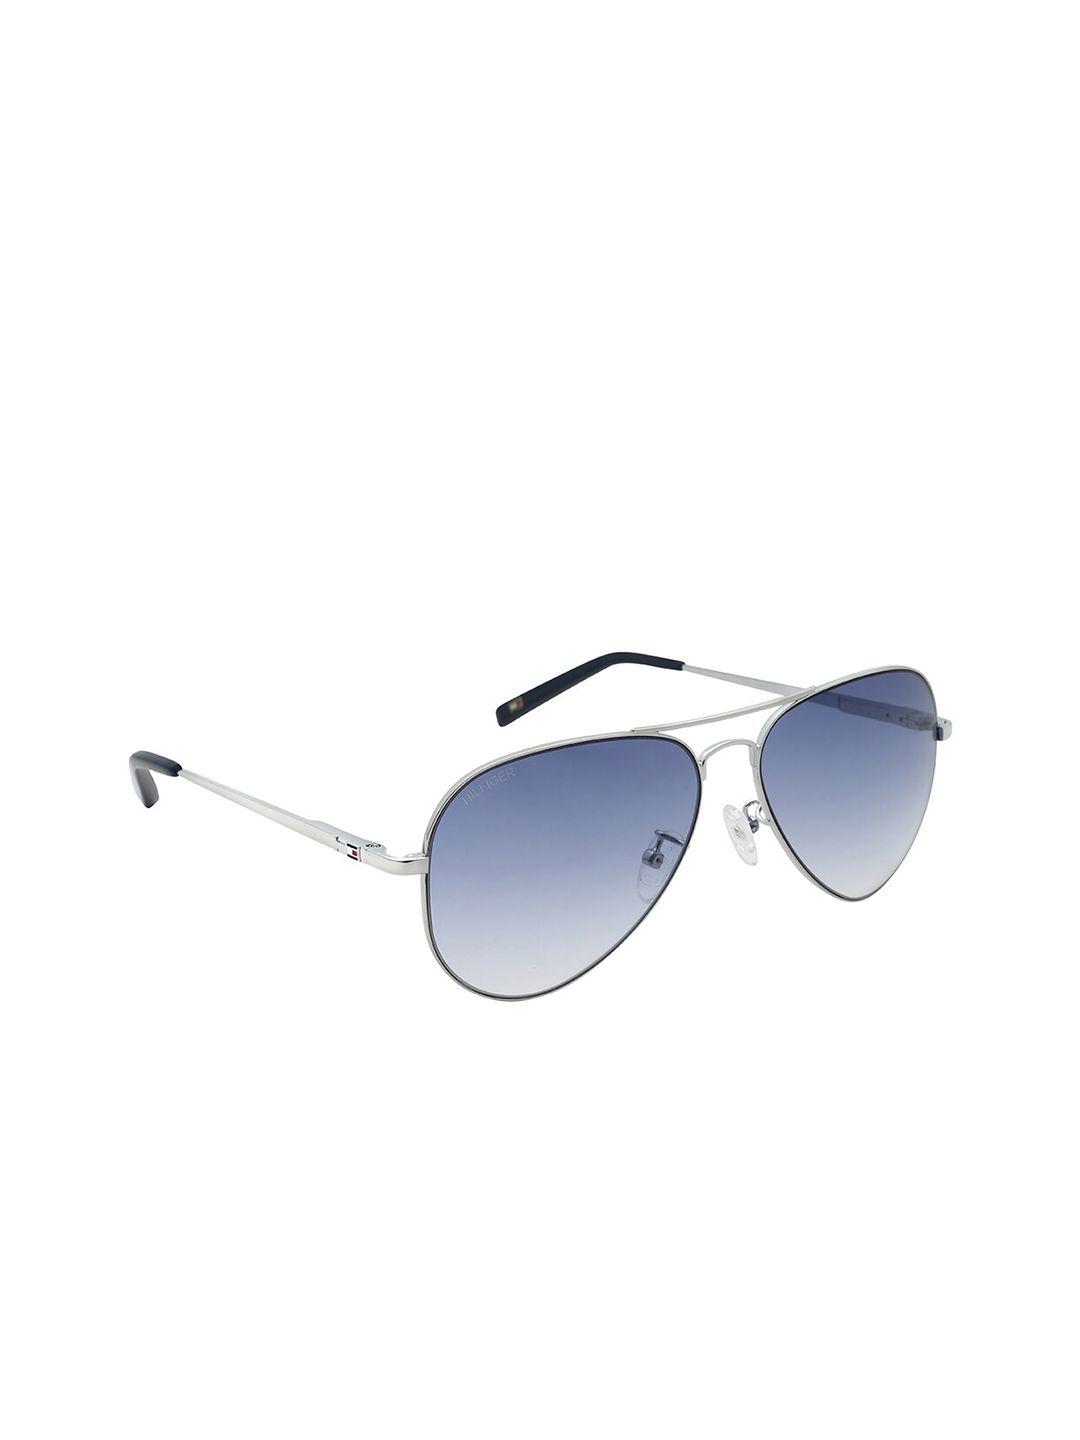 tommy hilfiger unisex blue lens & silver-toned aviator sunglasses th marco c4